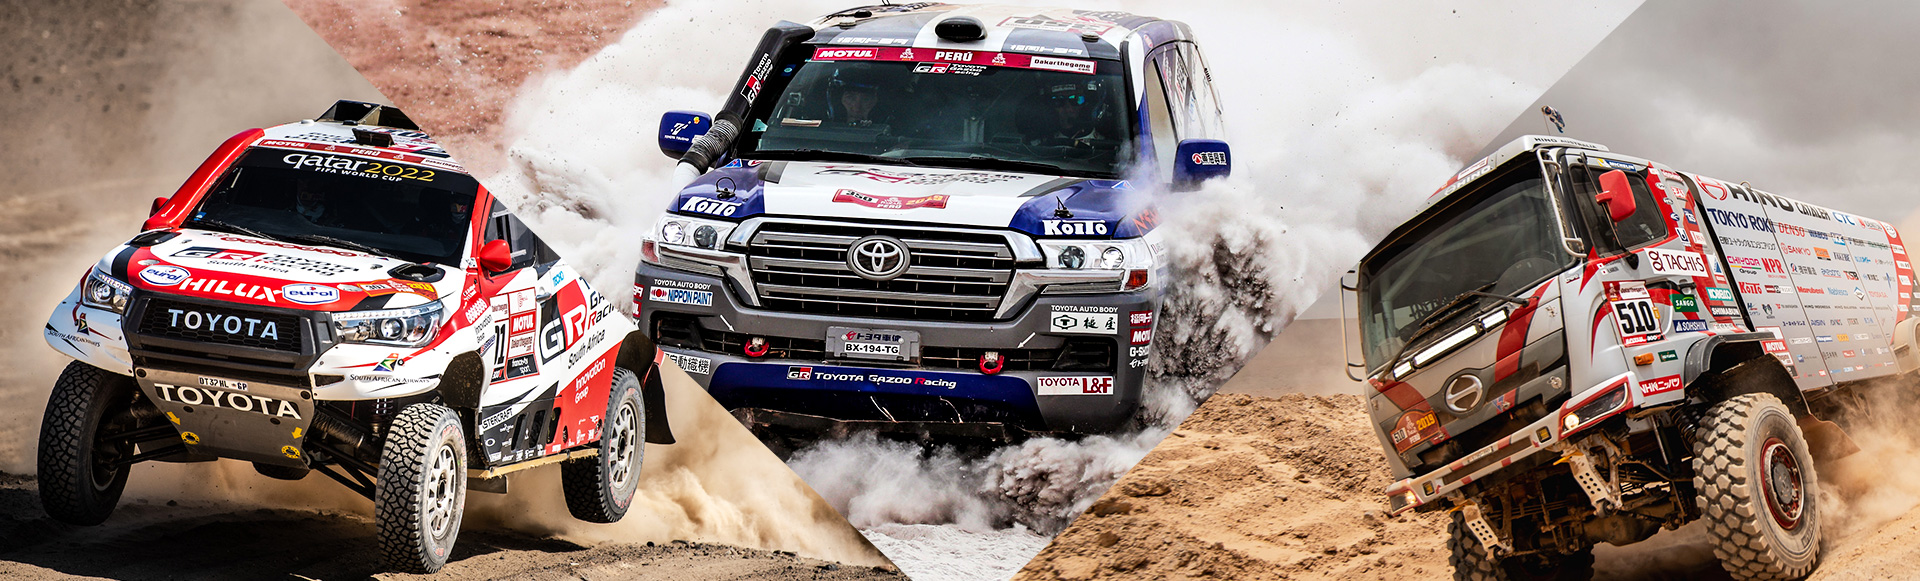 Comment from President Akio Toyoda Concerning the Outcome of the 2019 Dakar Rally